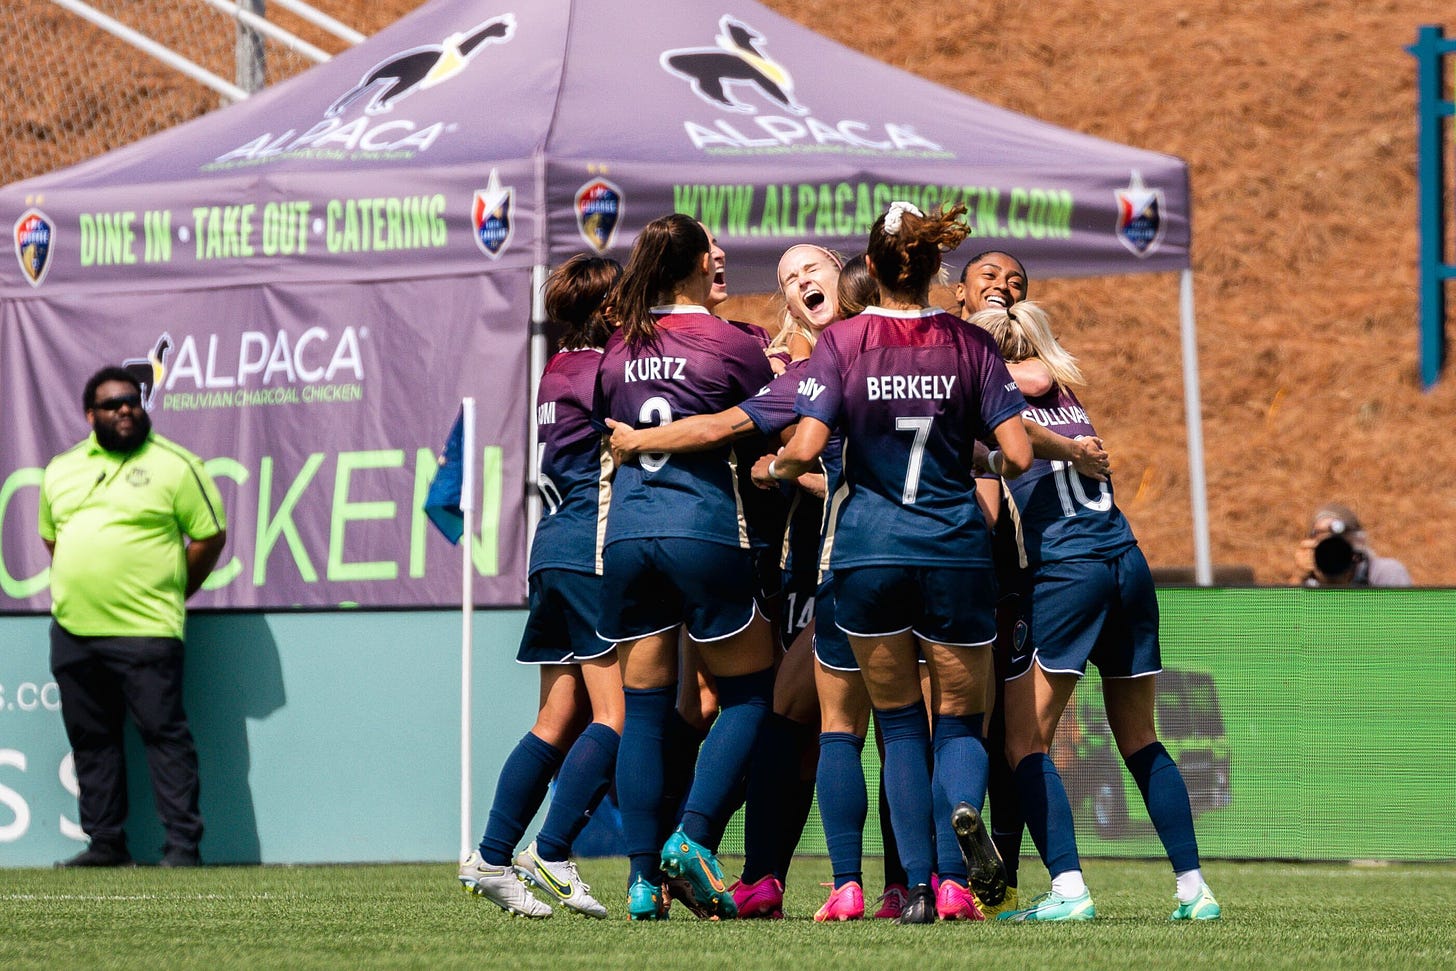 North Carolina Courage players celebrate Tyler Lussi's goal during a Sunday afternoon game in Cary, North Carolina